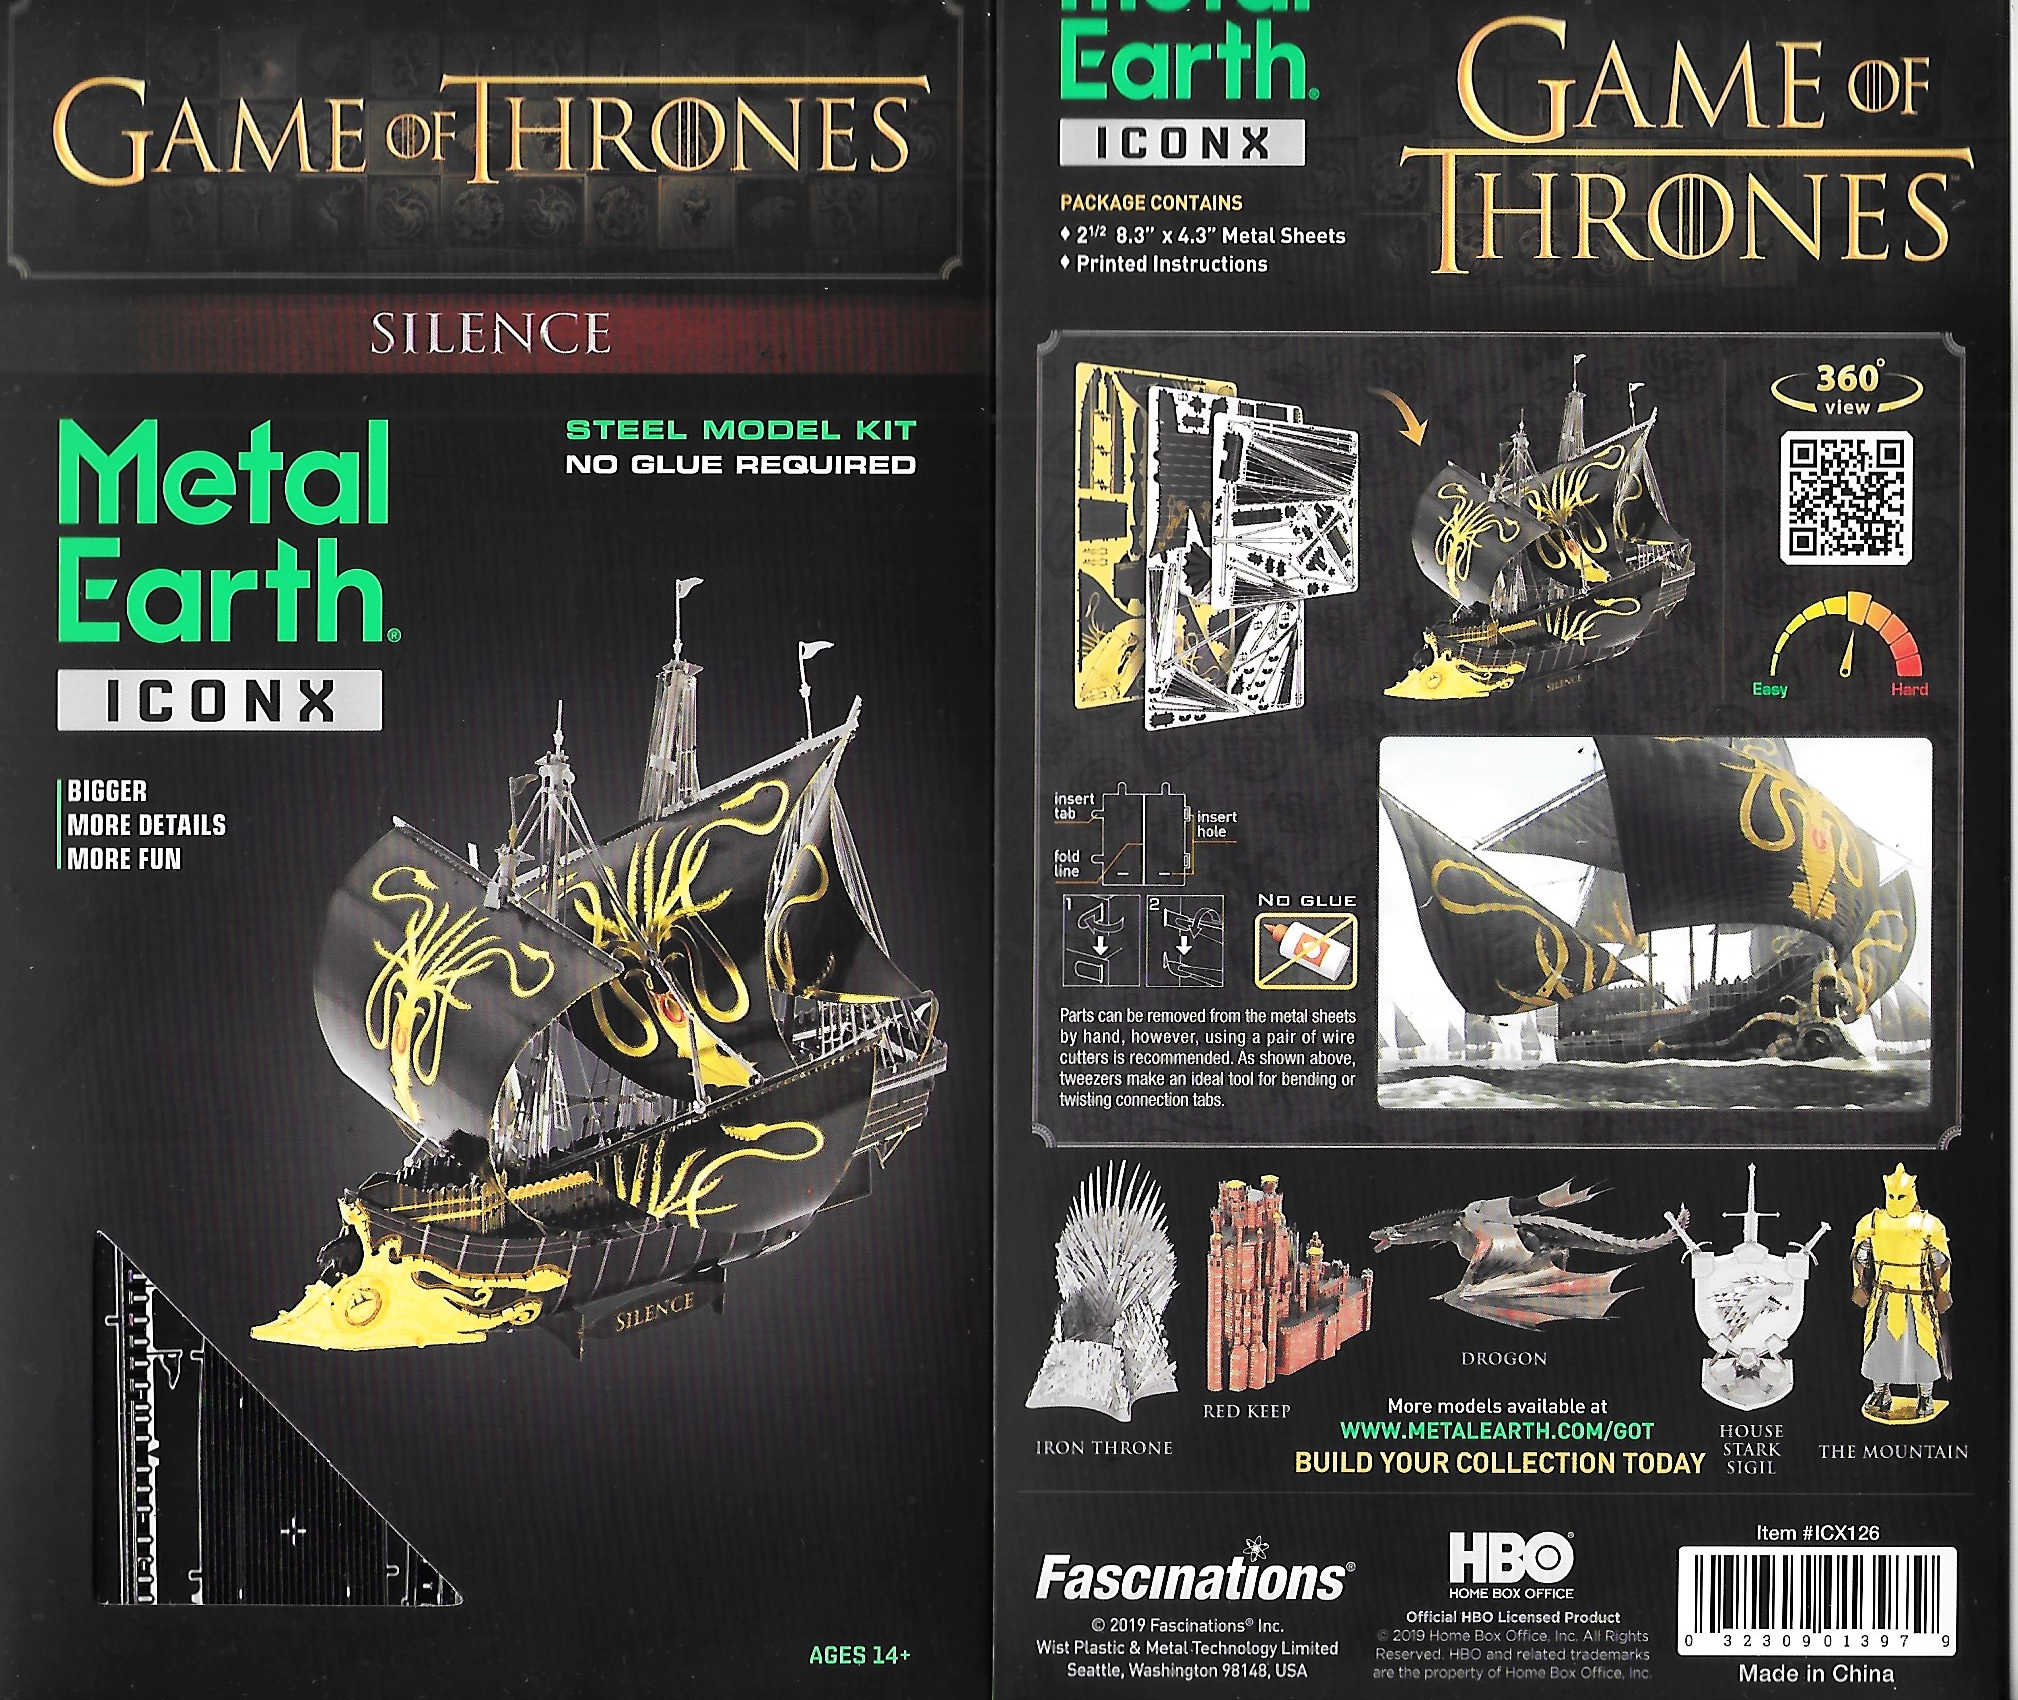 Fascinations ICONX Metal Earth Game of Thrones SILENCE 3D Steel Metal Model Kit 